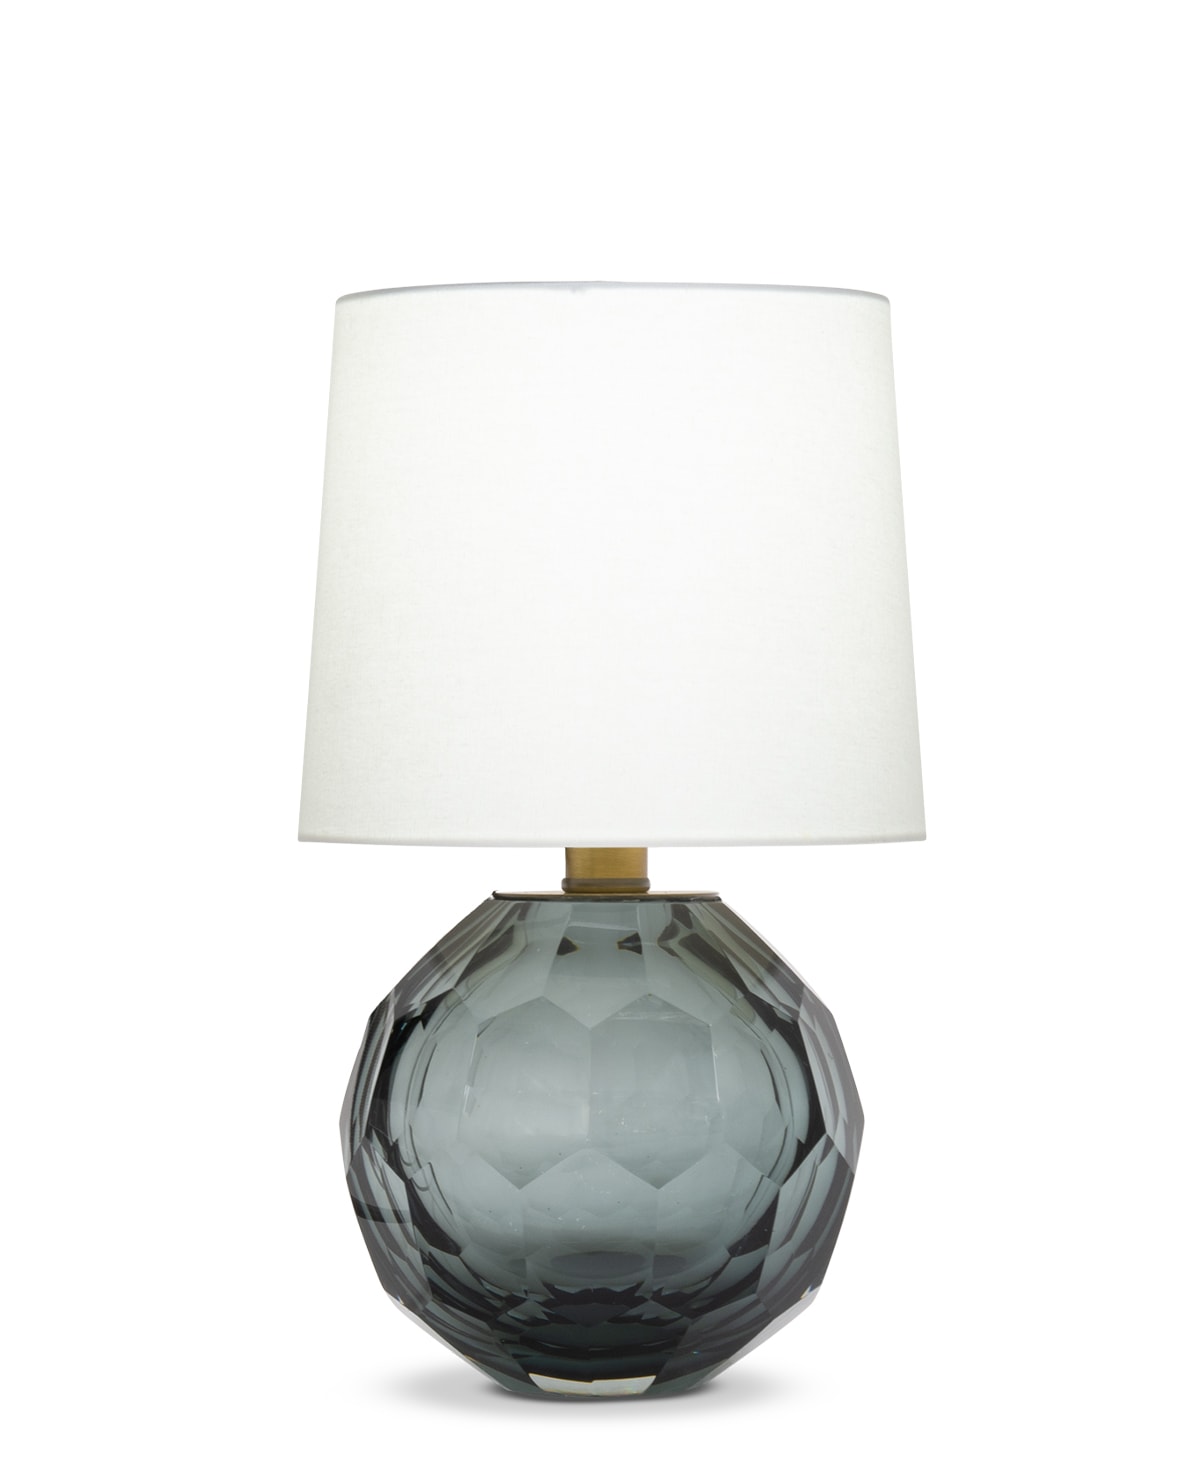 FlowDecor Leona Table Lamp in glass with smokey grey and off-white linen tapered drum shade (# 4562)